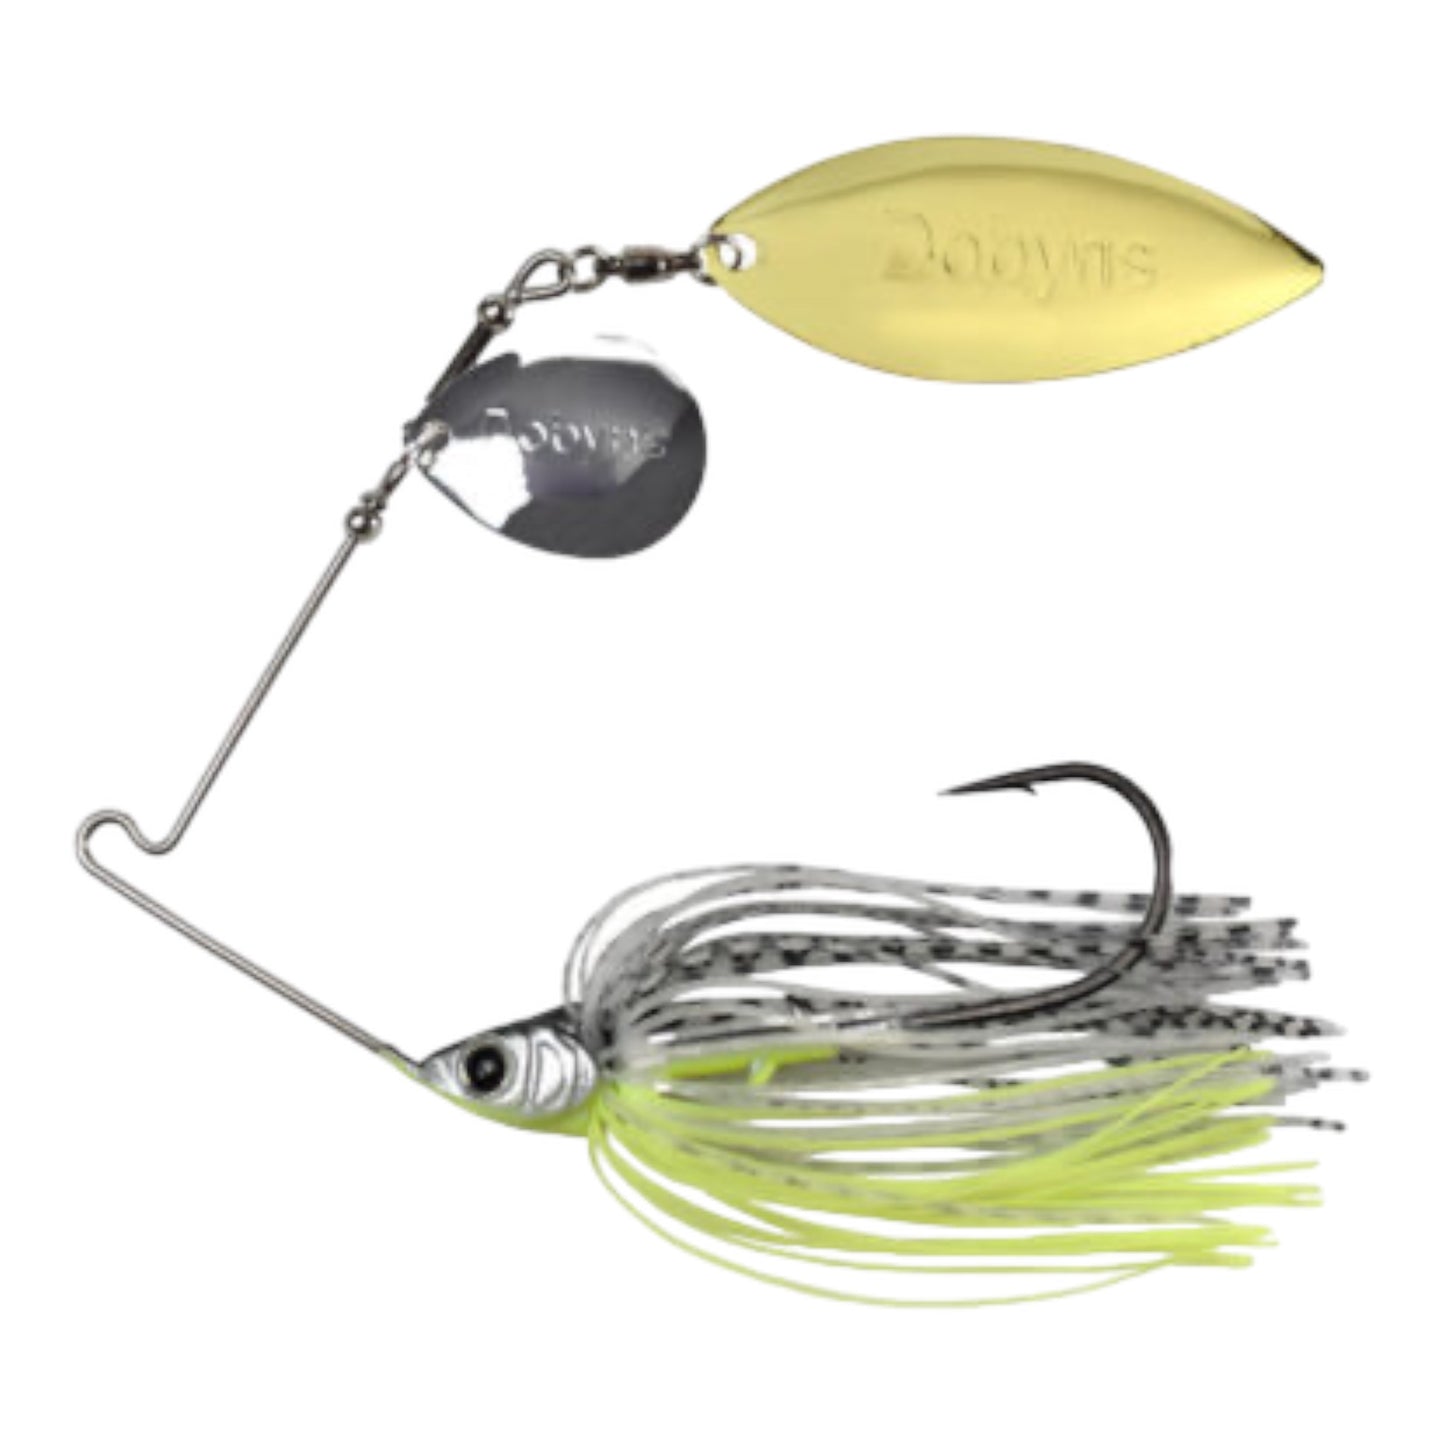 Dobyns Beast Series Spinnerbaits